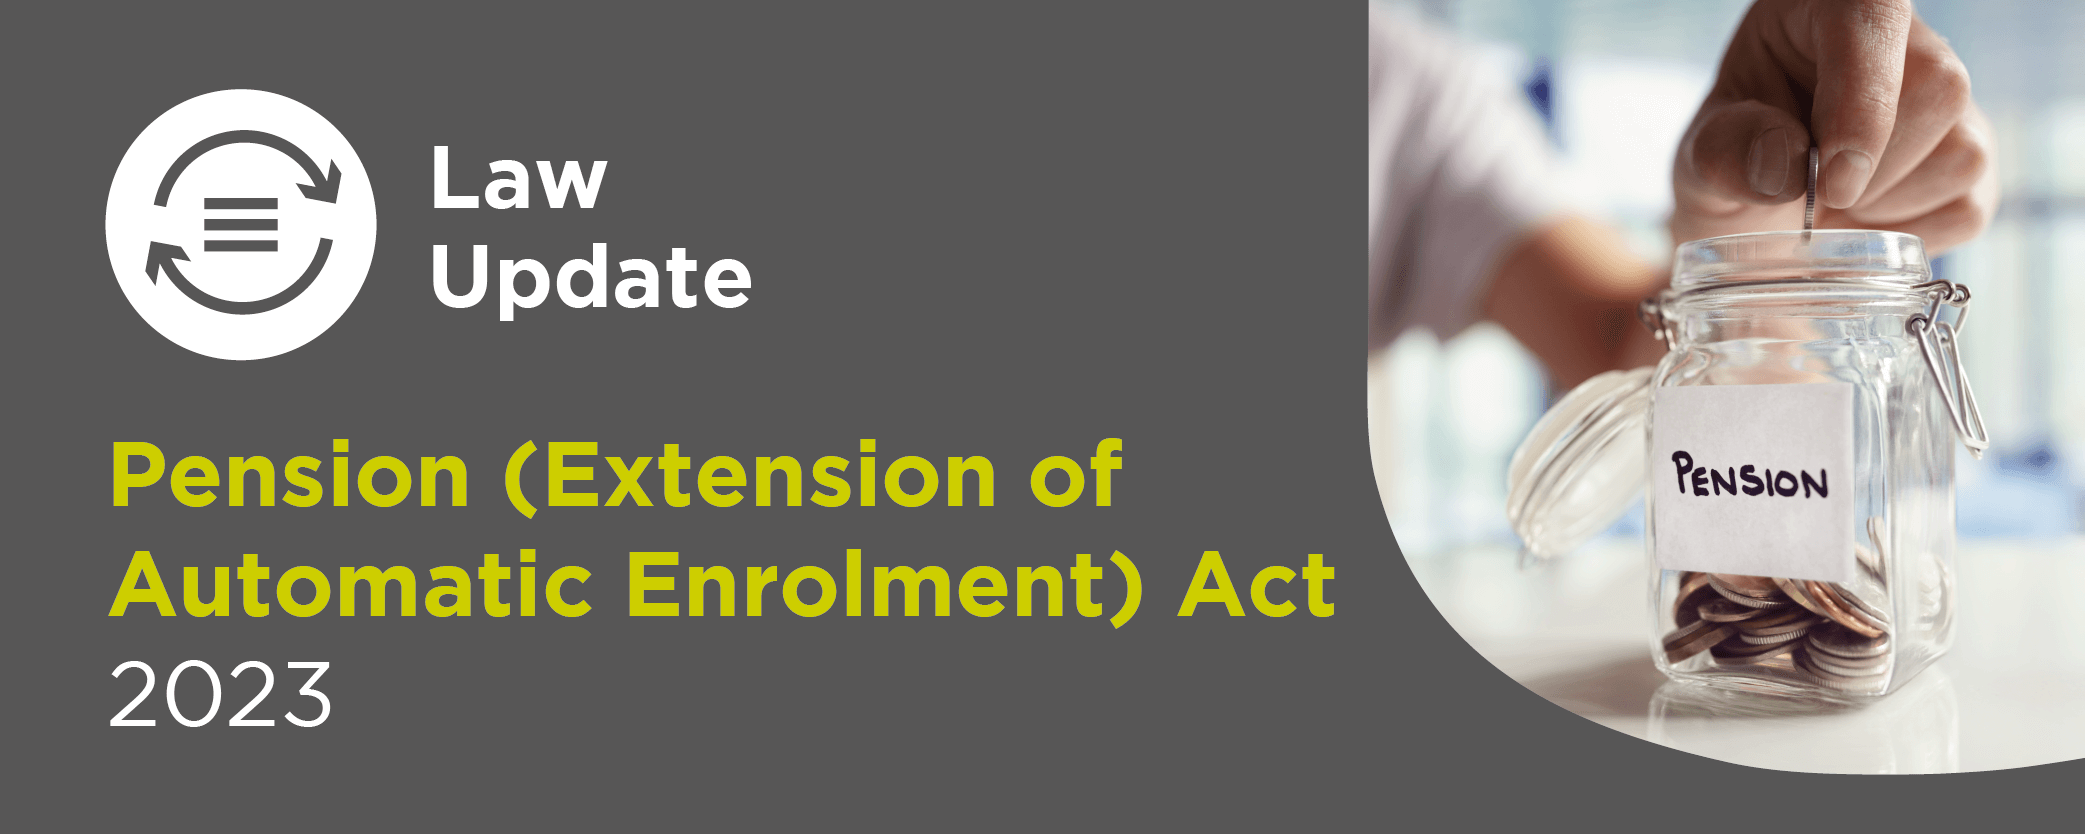 Pension (Extension of Automatic Enrolment) Act 2023